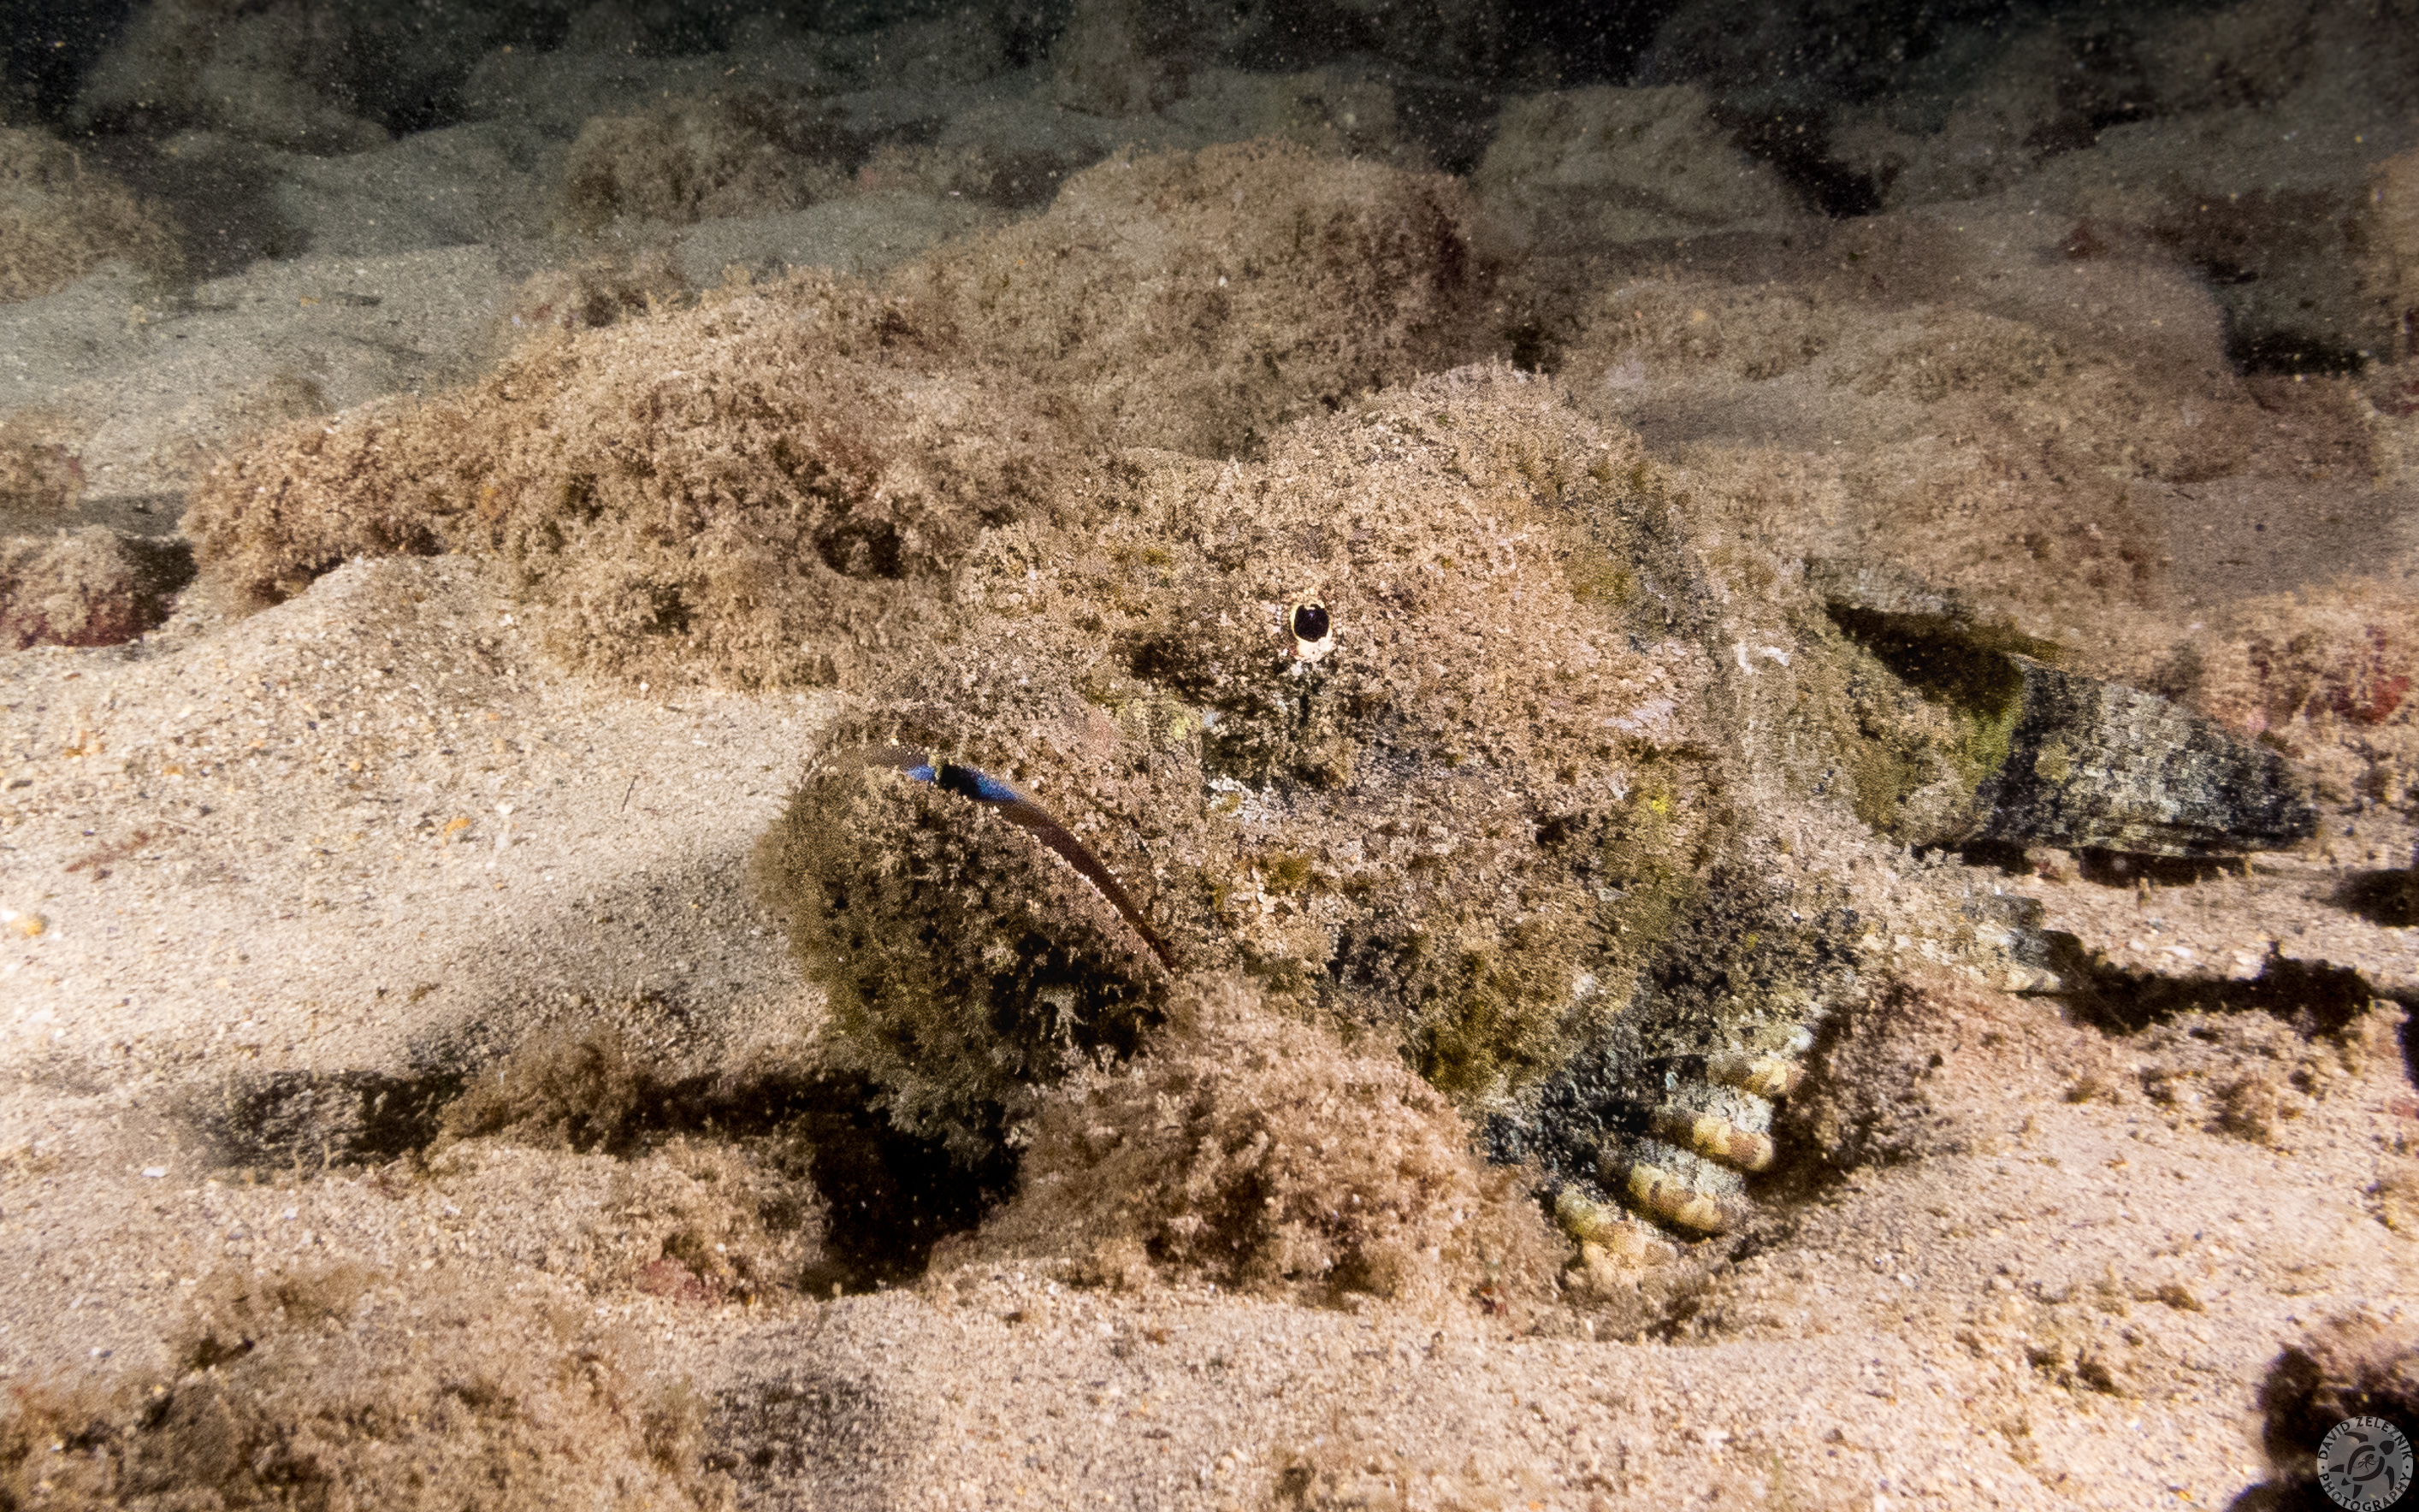 "Woe is me" says Eeyore the Devil Scorpionfish. If I just sit here and blend in, maybe dinner will come to me.